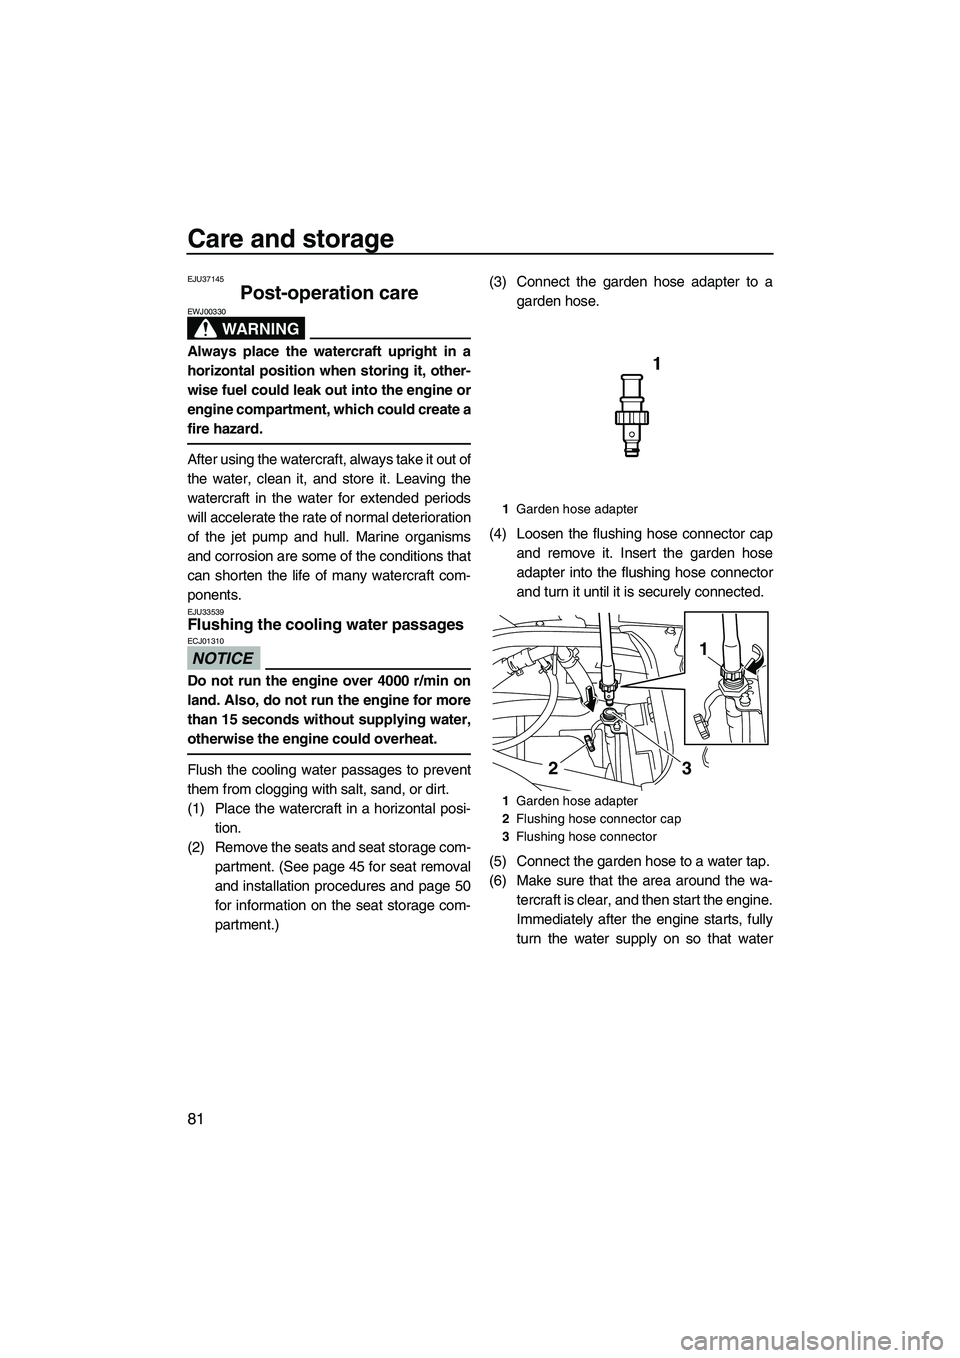 YAMAHA FX HO 2010  Owners Manual Care and storage
81
EJU37145
Post-operation care 
WARNING
EWJ00330
Always place the watercraft upright in a
horizontal position when storing it, other-
wise fuel could leak out into the engine or
engi